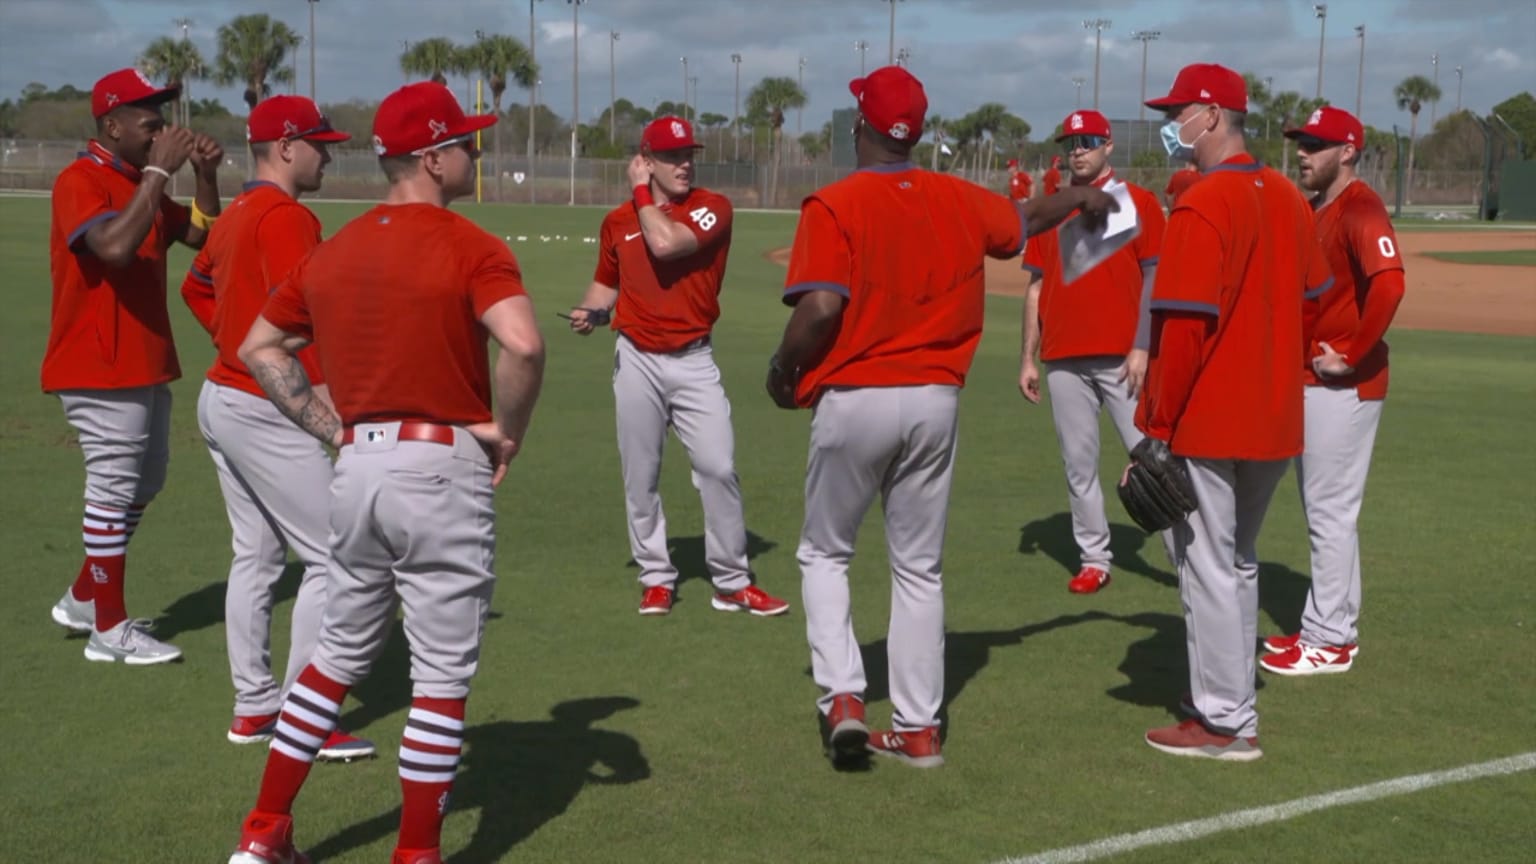 Sights & Sounds from Spring Training (3.17.22) 